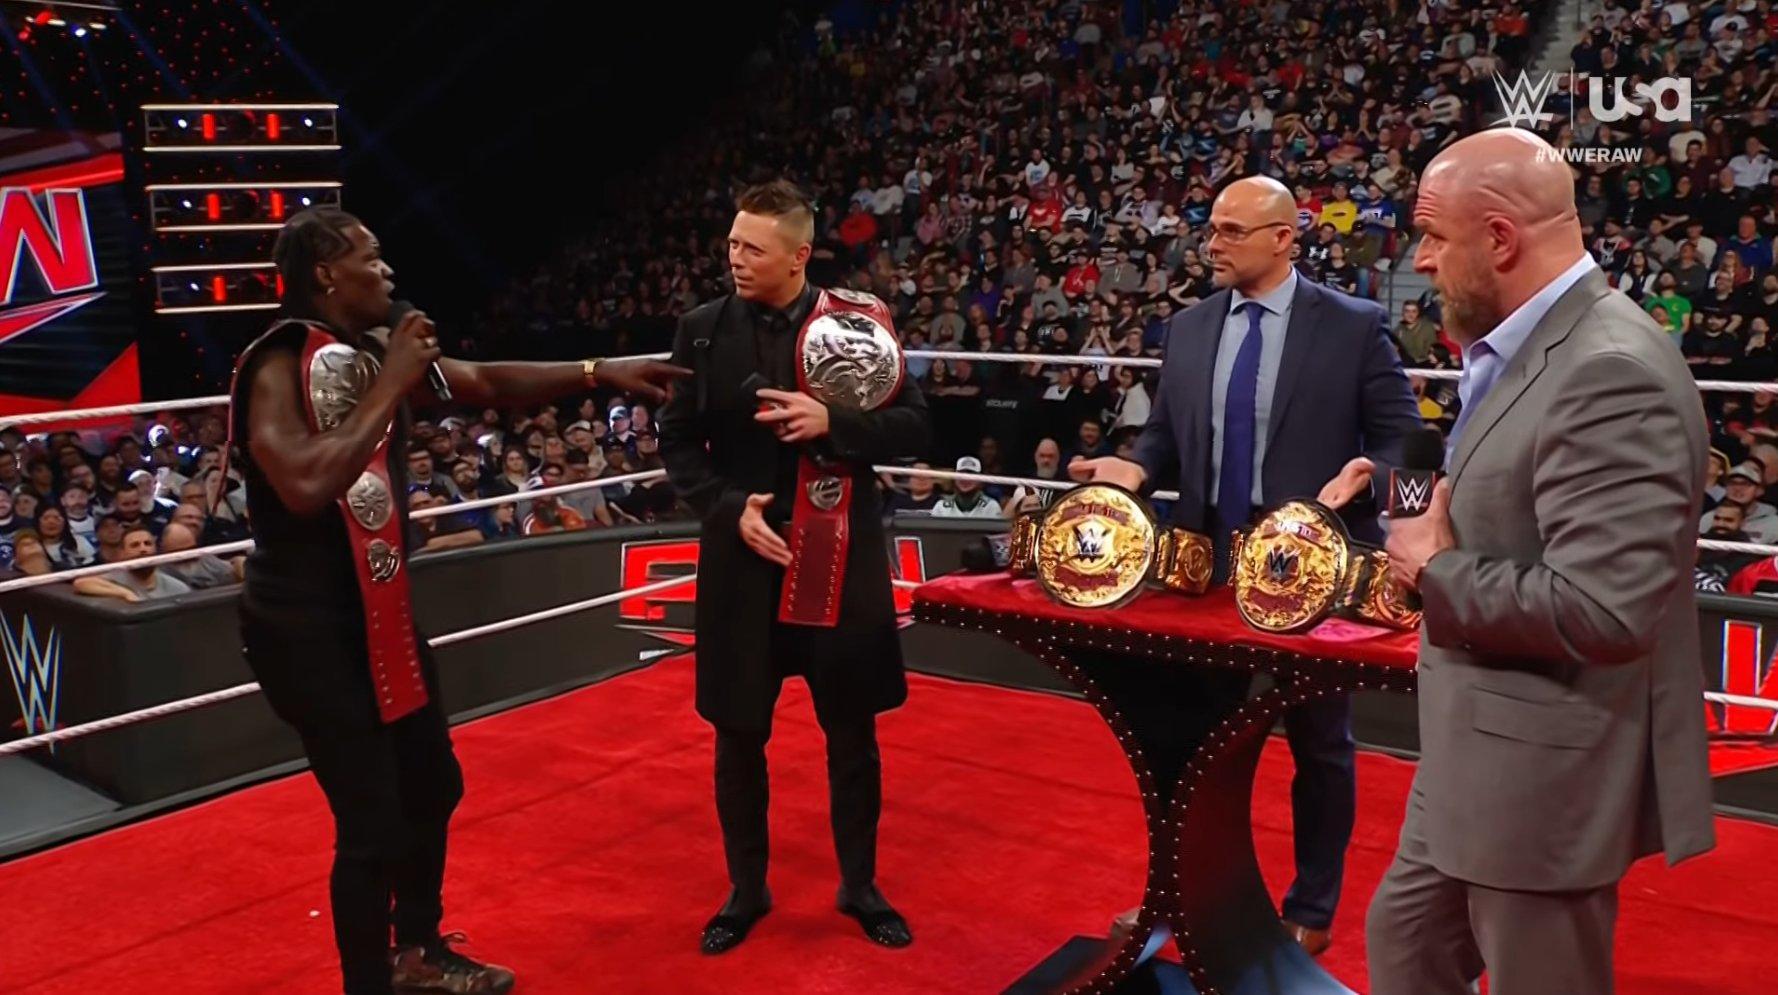 WWE Presents Awesome Truth With New Tag Team Championships on Raw